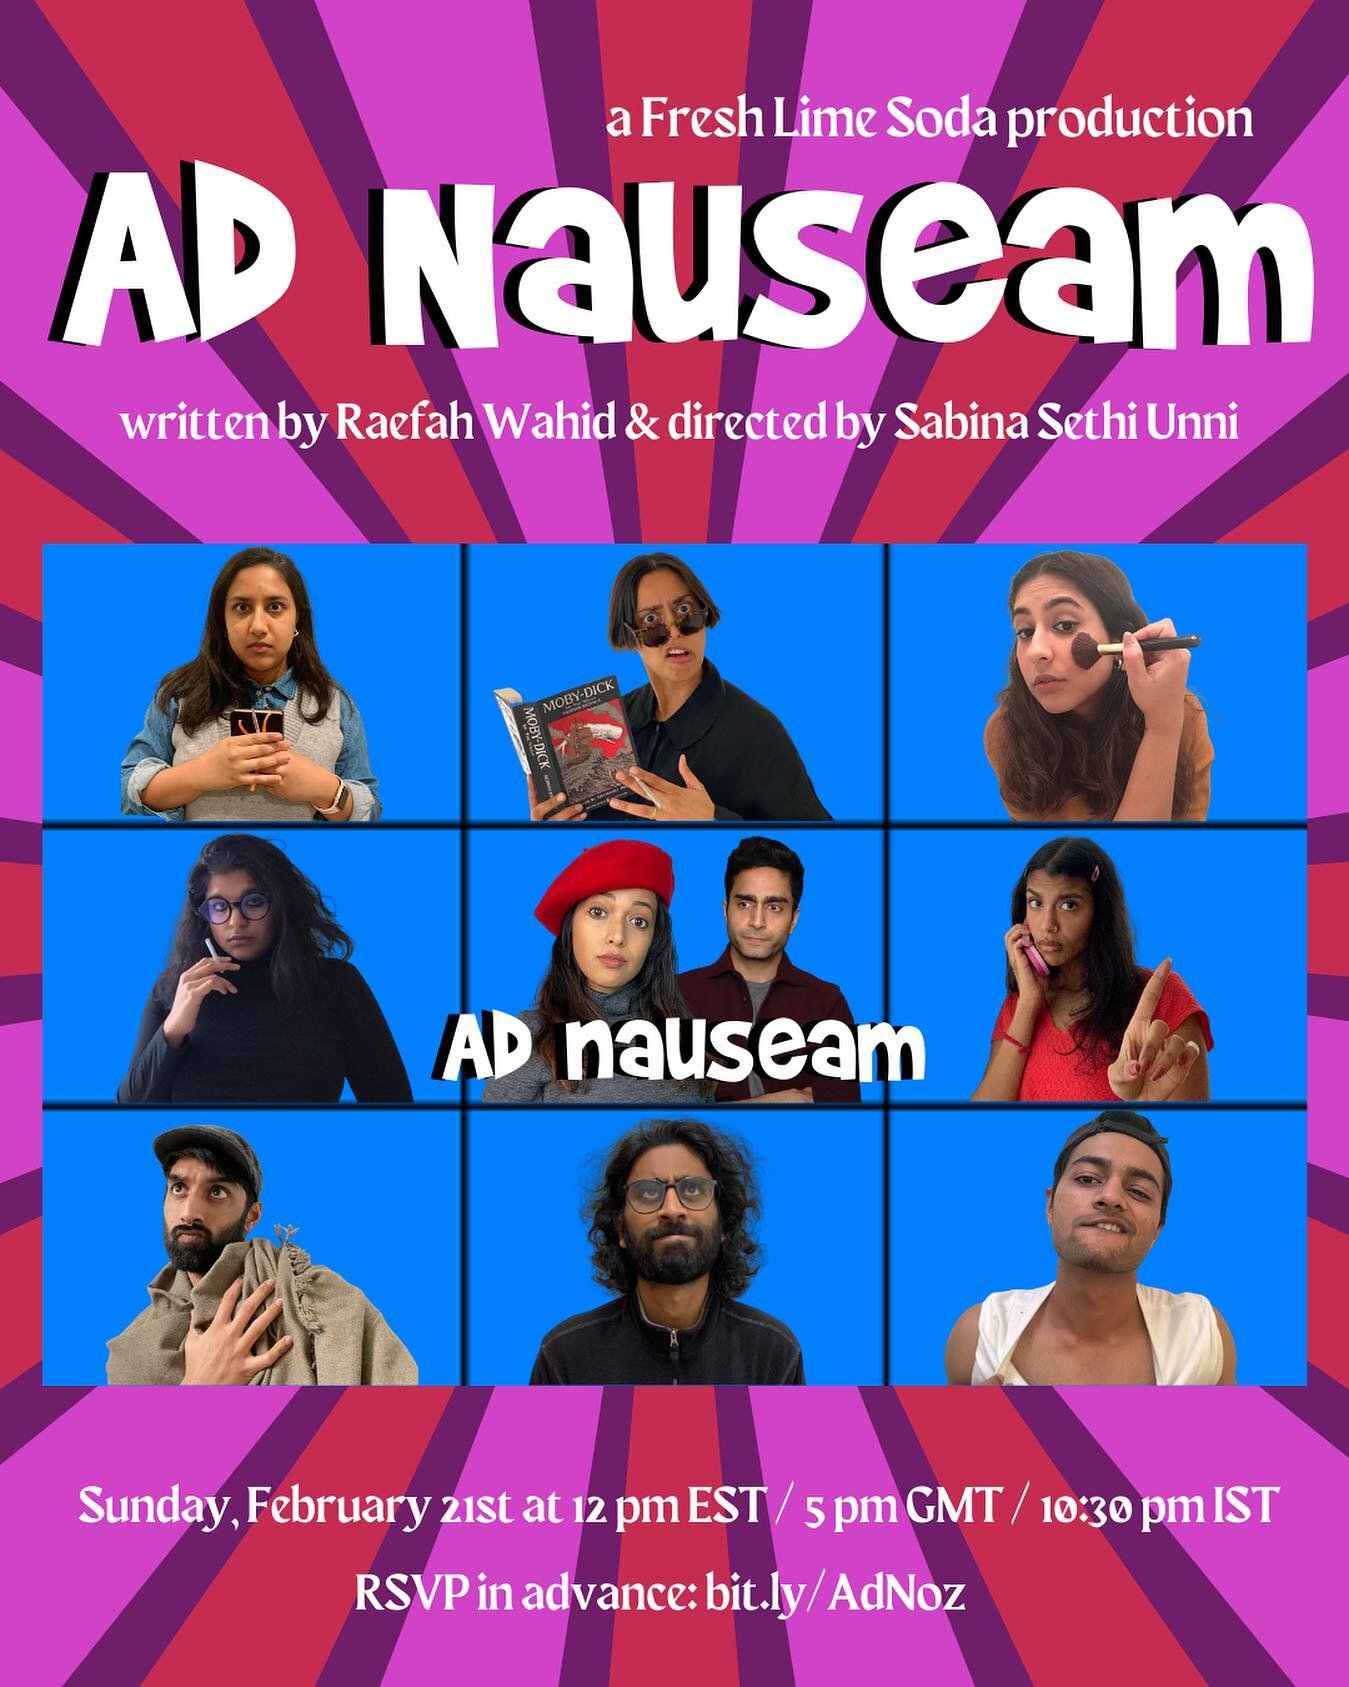 We are thrilled to announce the premiere of a WILD new play, Ad Nauseam, written by Raefah Wahid, directed by @sabinathegreat , stage managed by @padya307 , assisted by Urja Jariwala, and sound designed by @luckybommireddy!

Ad Nauseam is a play abou